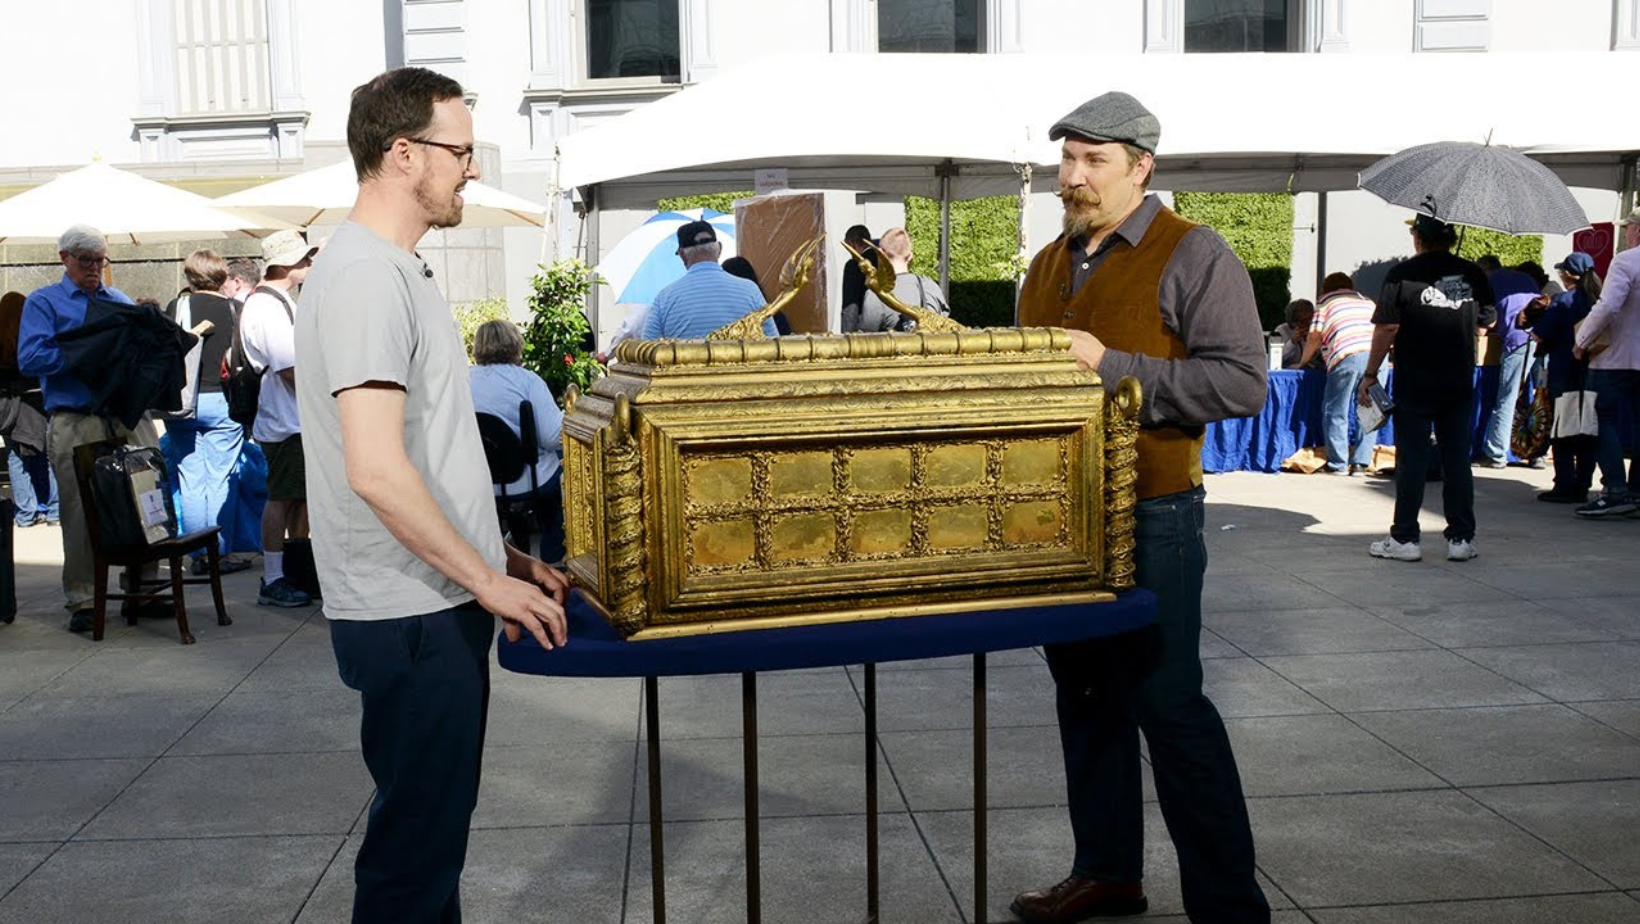 Two men standing next to 'Raiders of the Lost Ark' movie prop